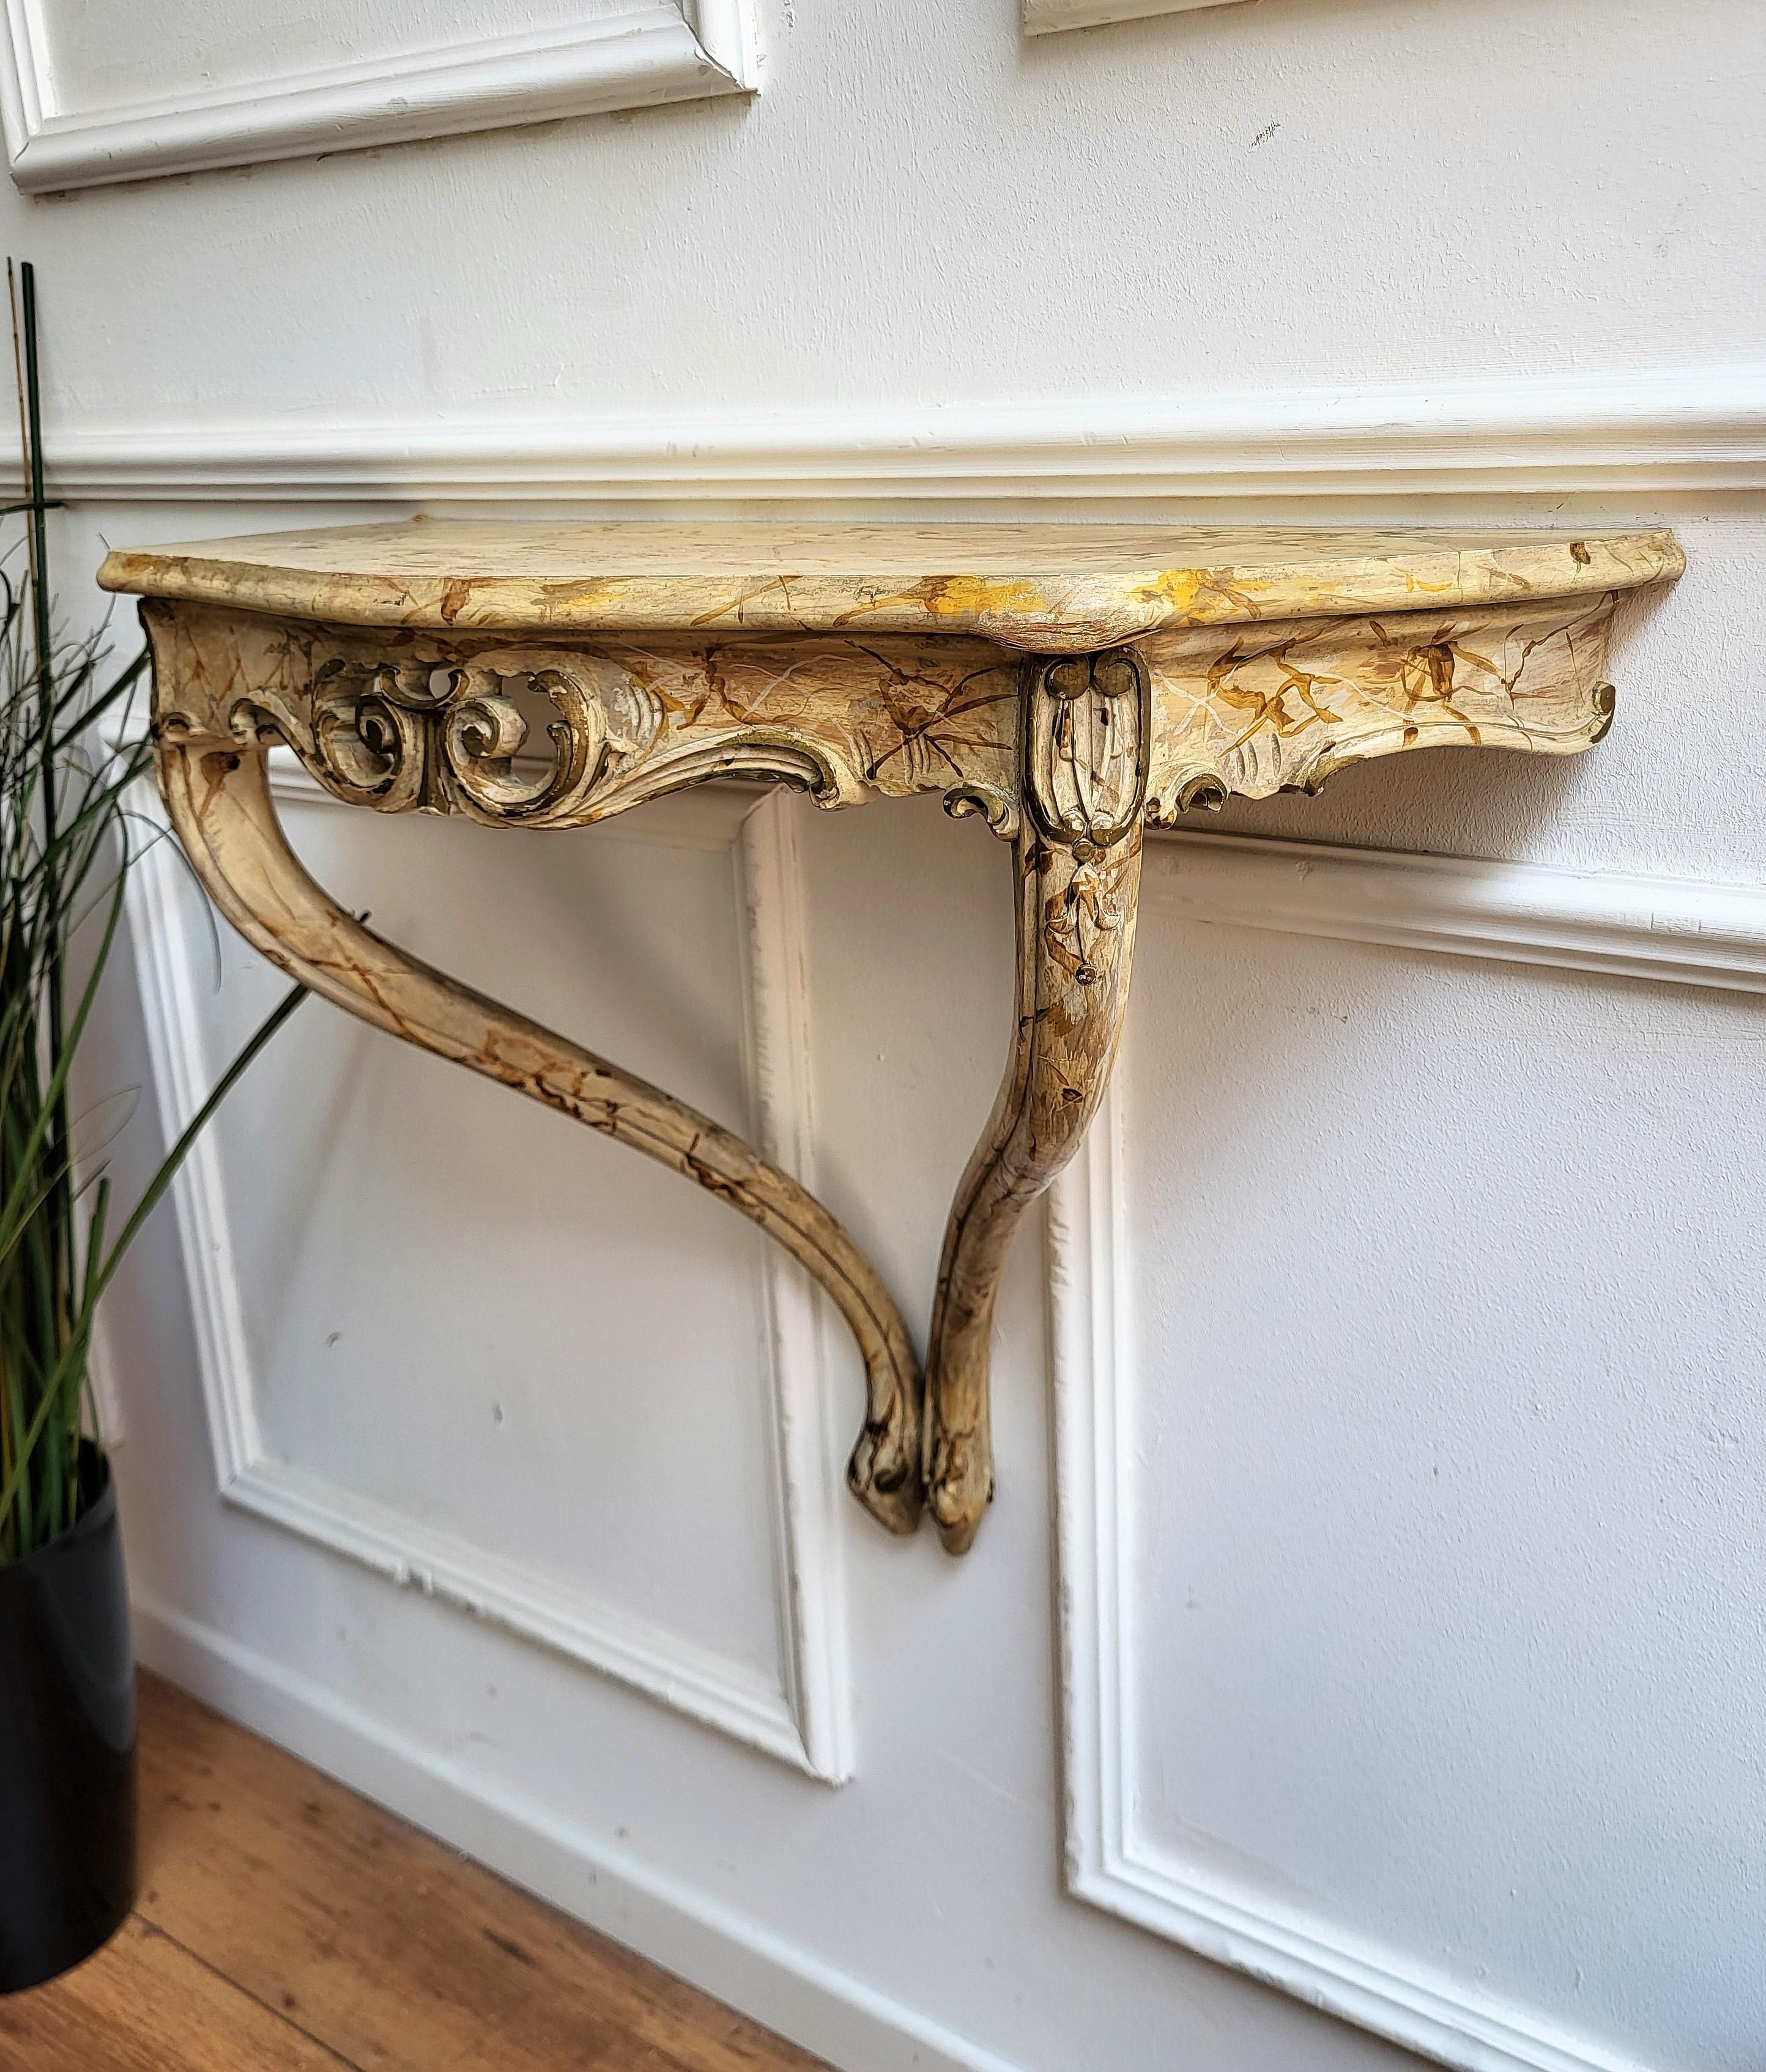 Italian Baroque Wooden Carved Painted Wall Mounted Console Table Shelf For Sale 2